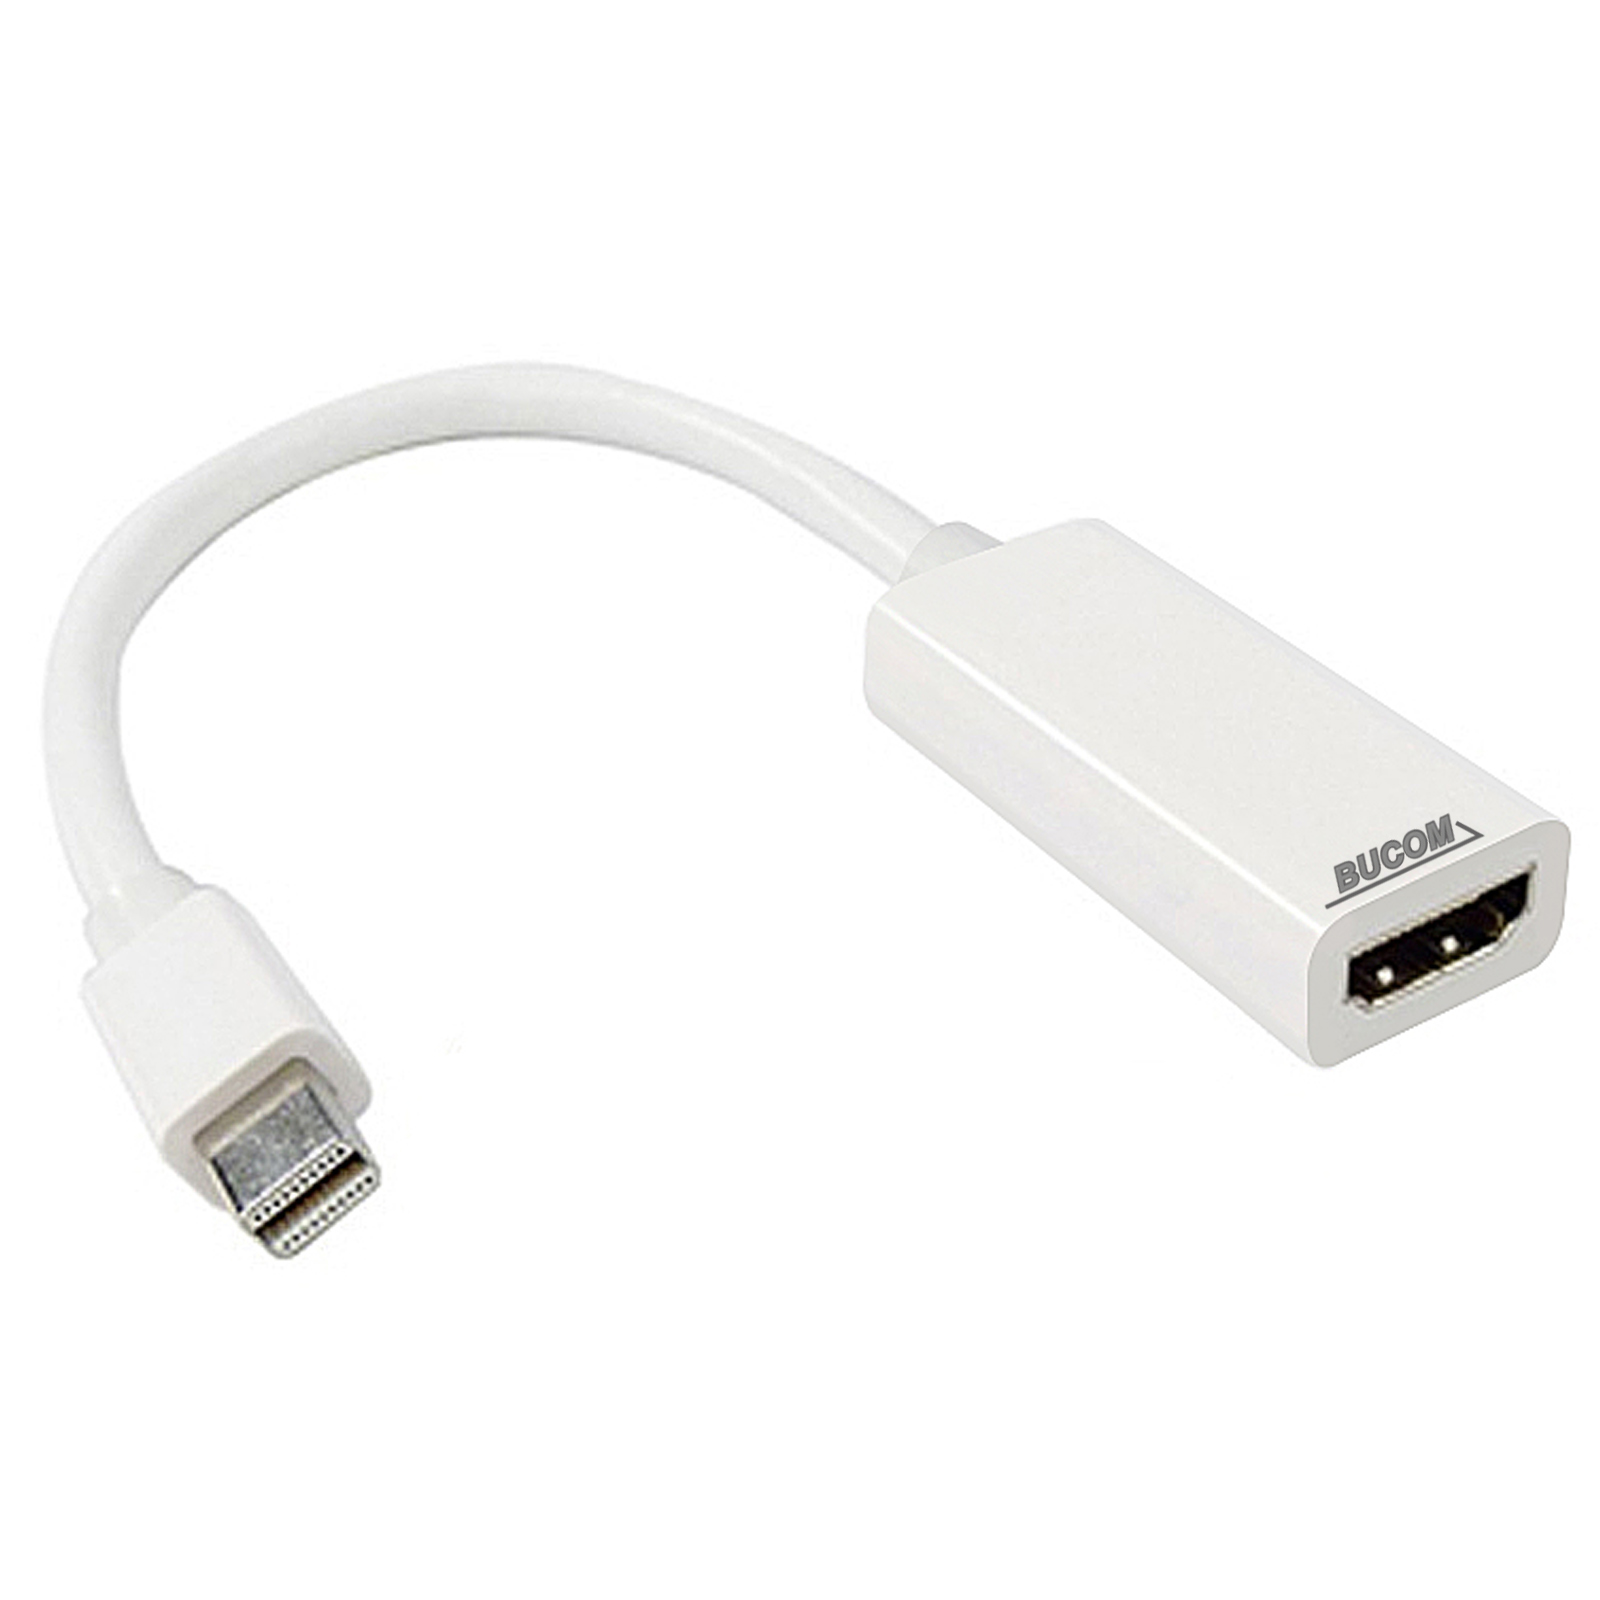 thunderbolt connector to hdmi